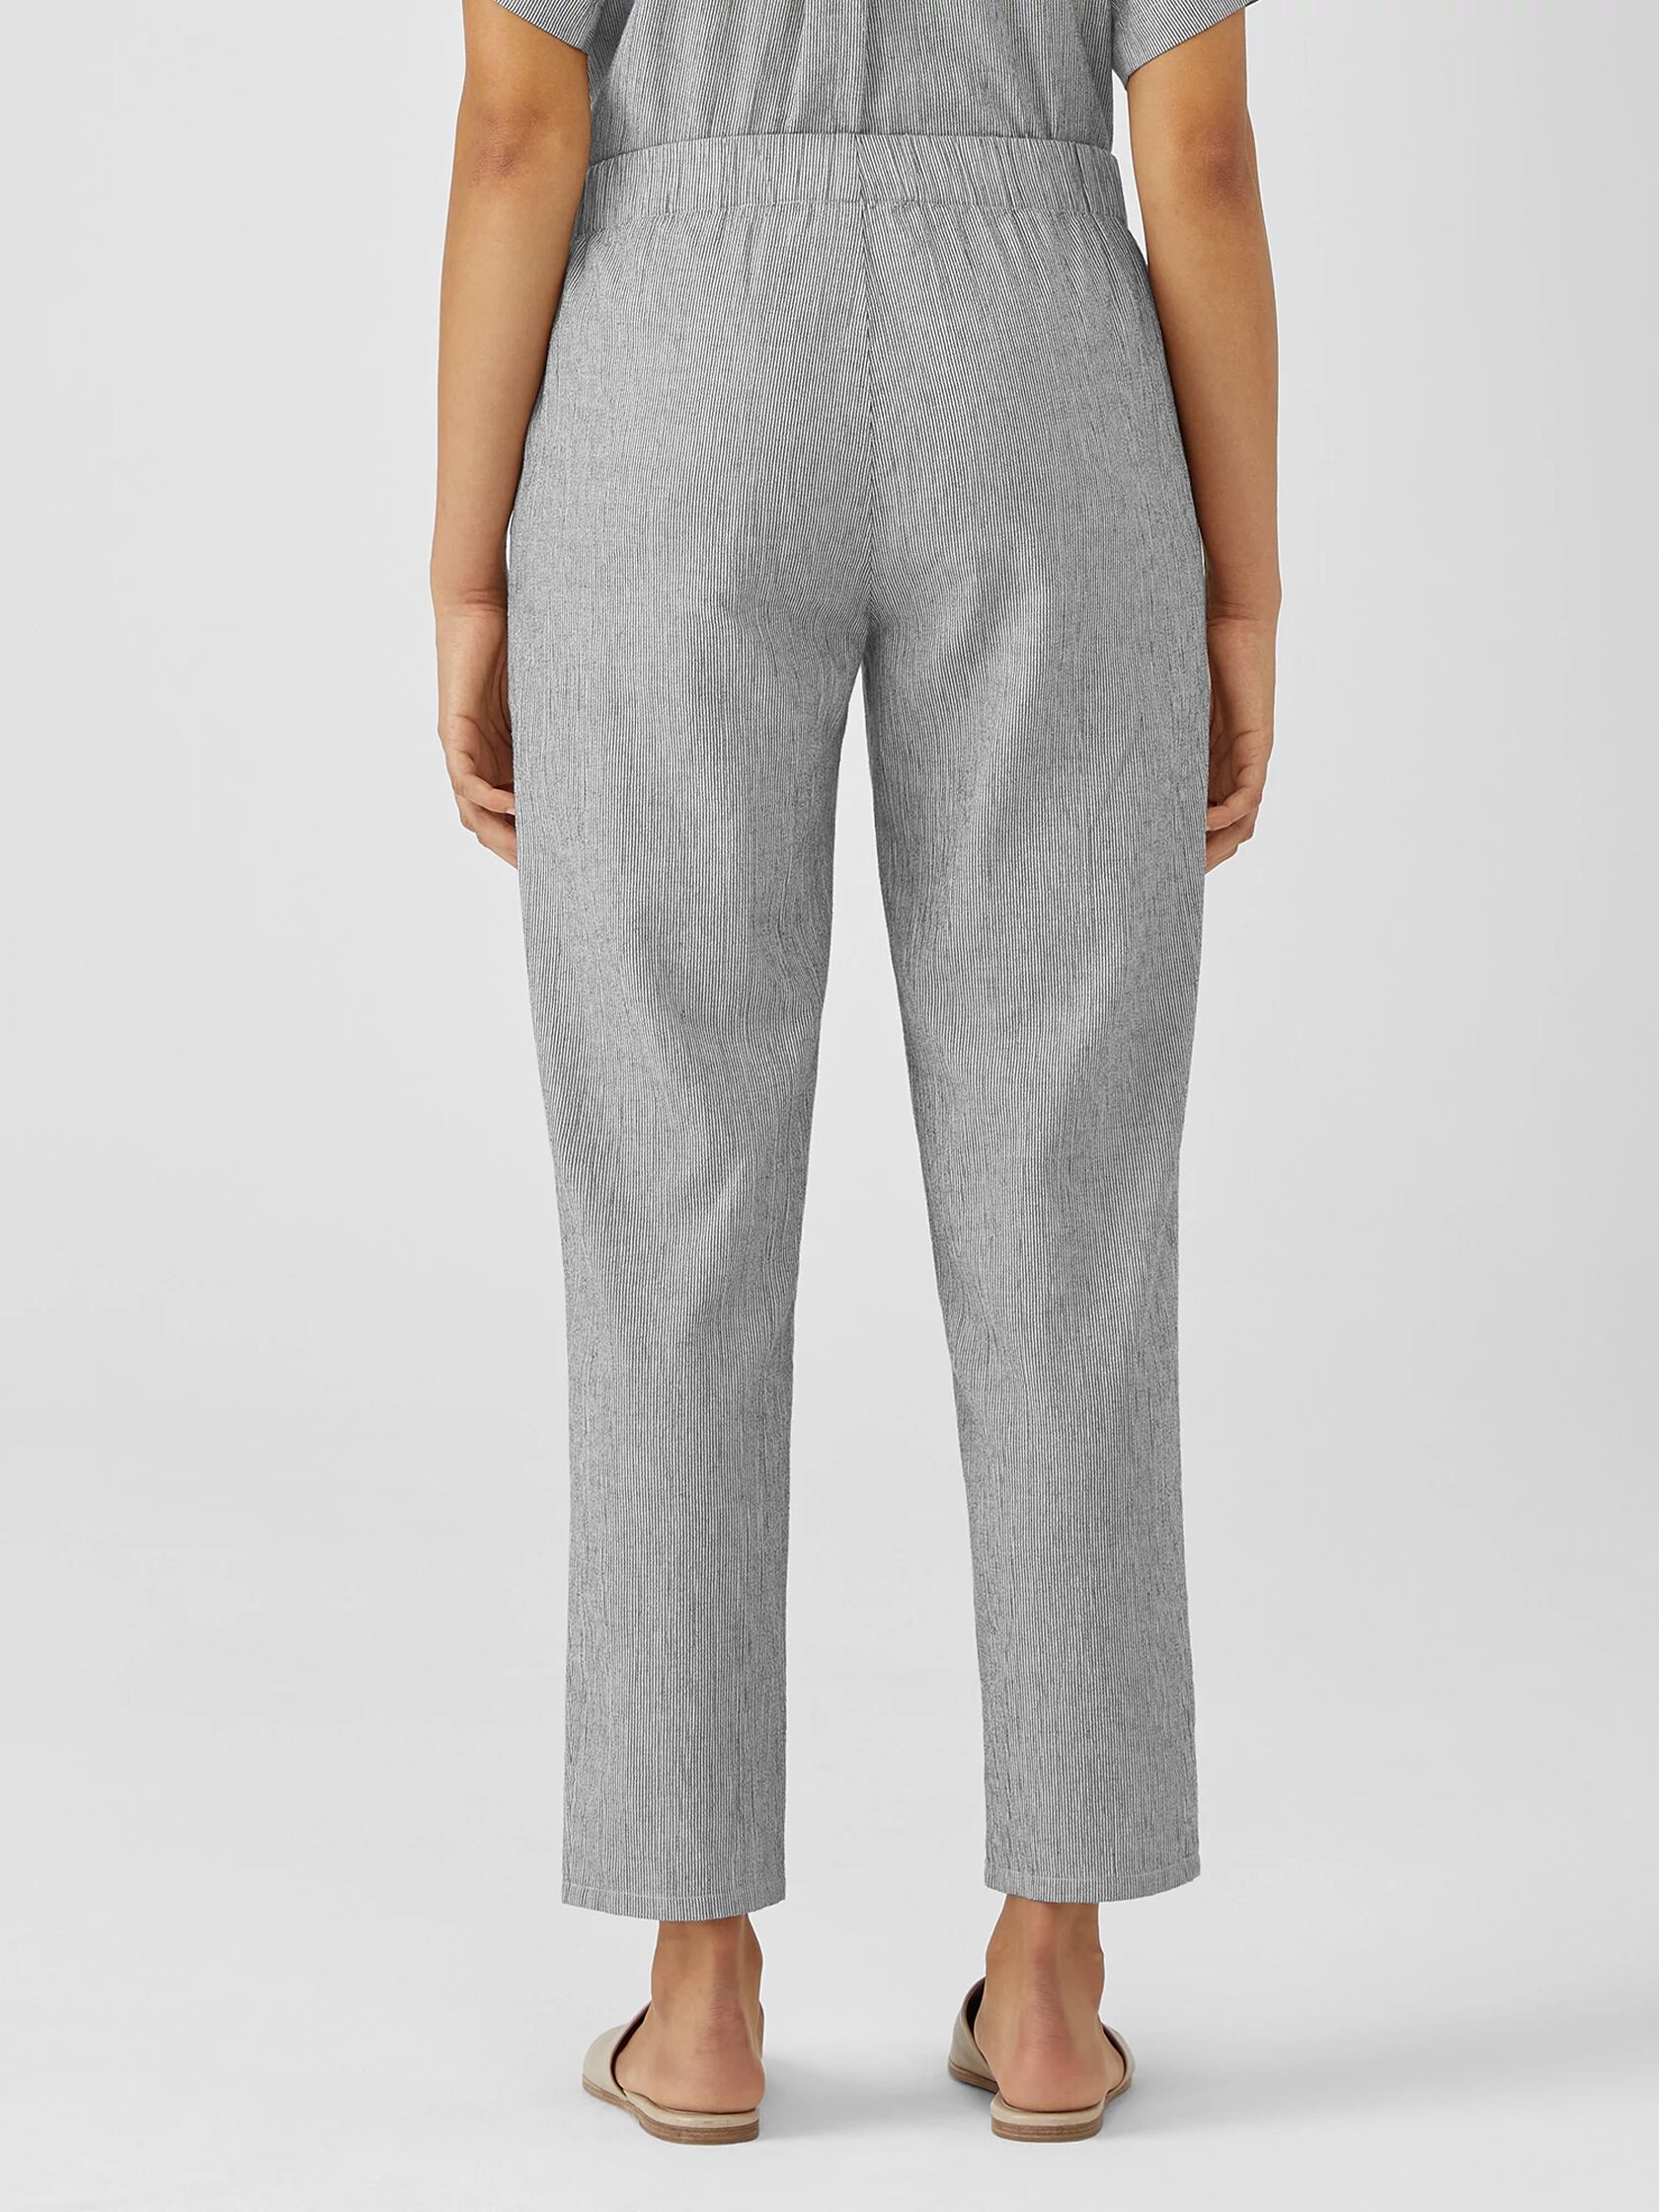 Organic Cotton Linen Ticking Stripe Tapered Pant | EILEEN FISHER